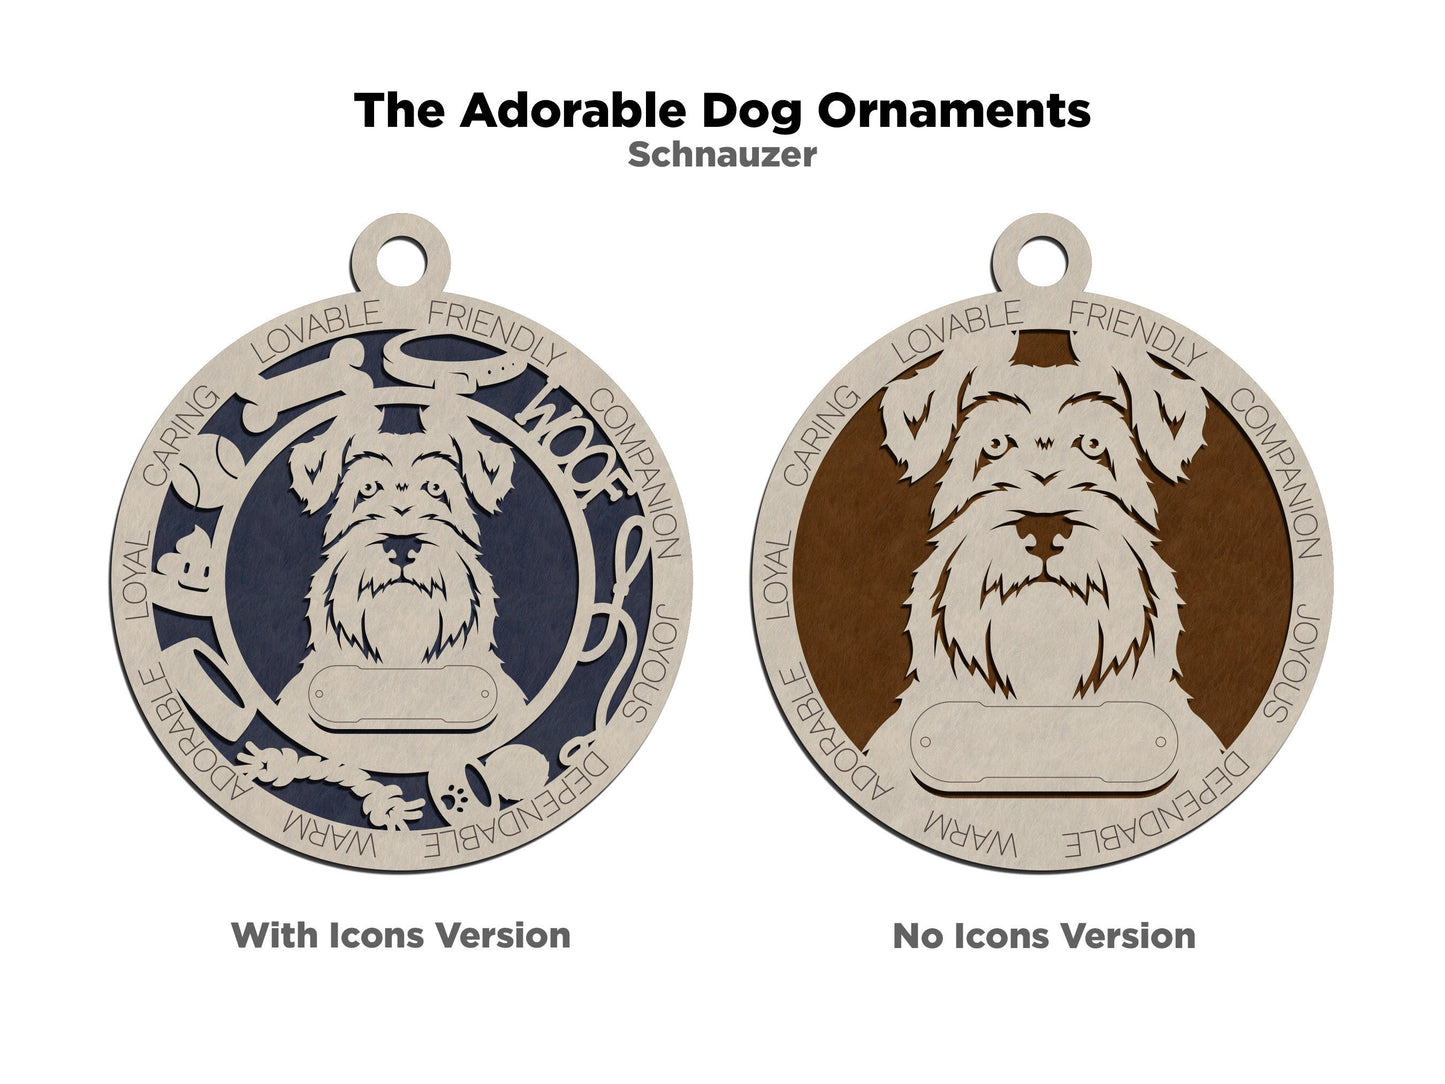 Schnauzer - Adorable Dog Ornaments - 2 Ornaments included - SVG, PDF, AI File Download - Sized for Glowforge